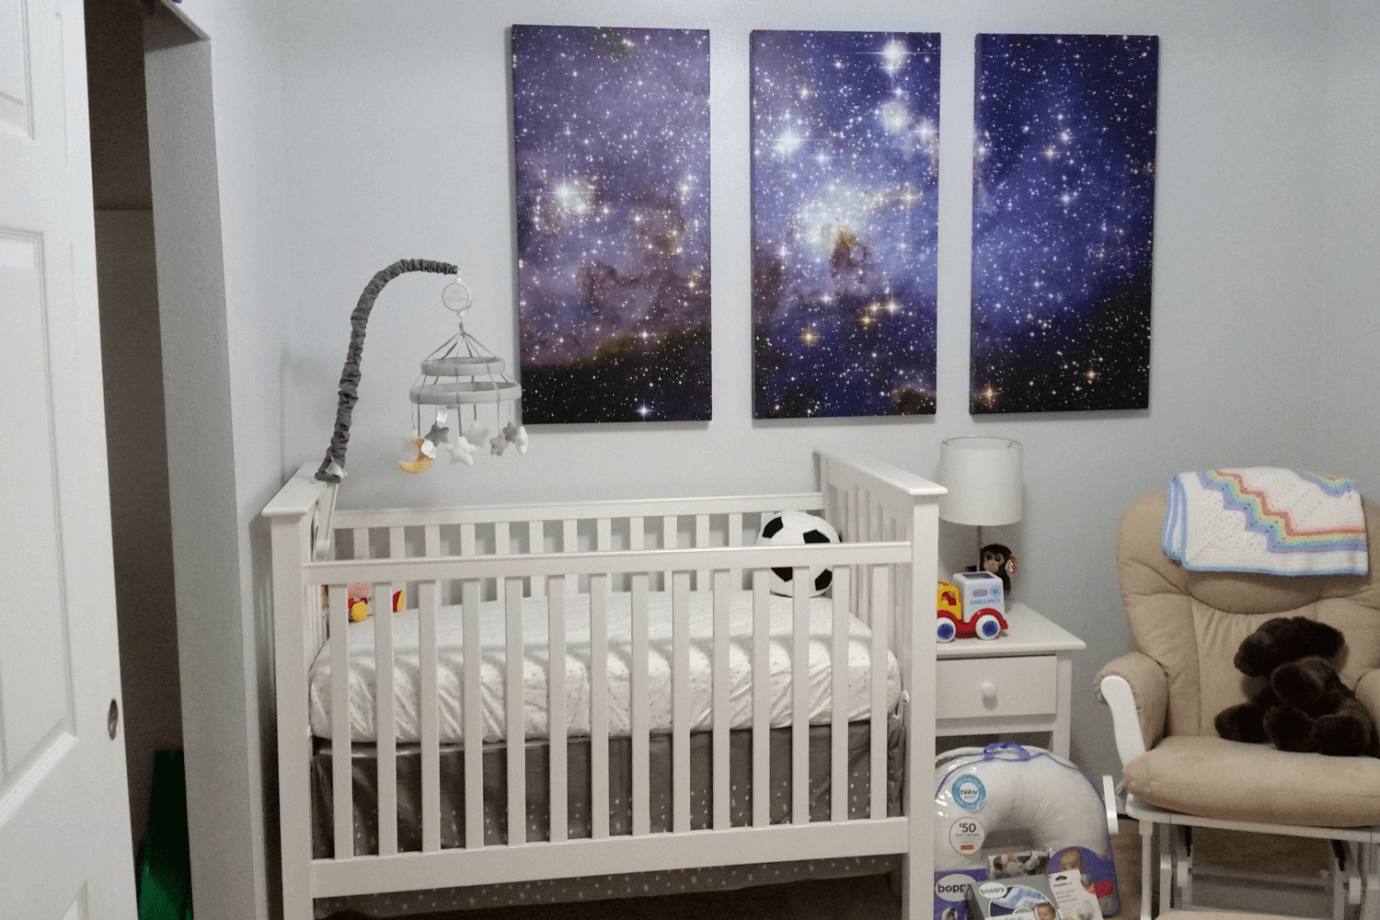 outer space art in baby's room